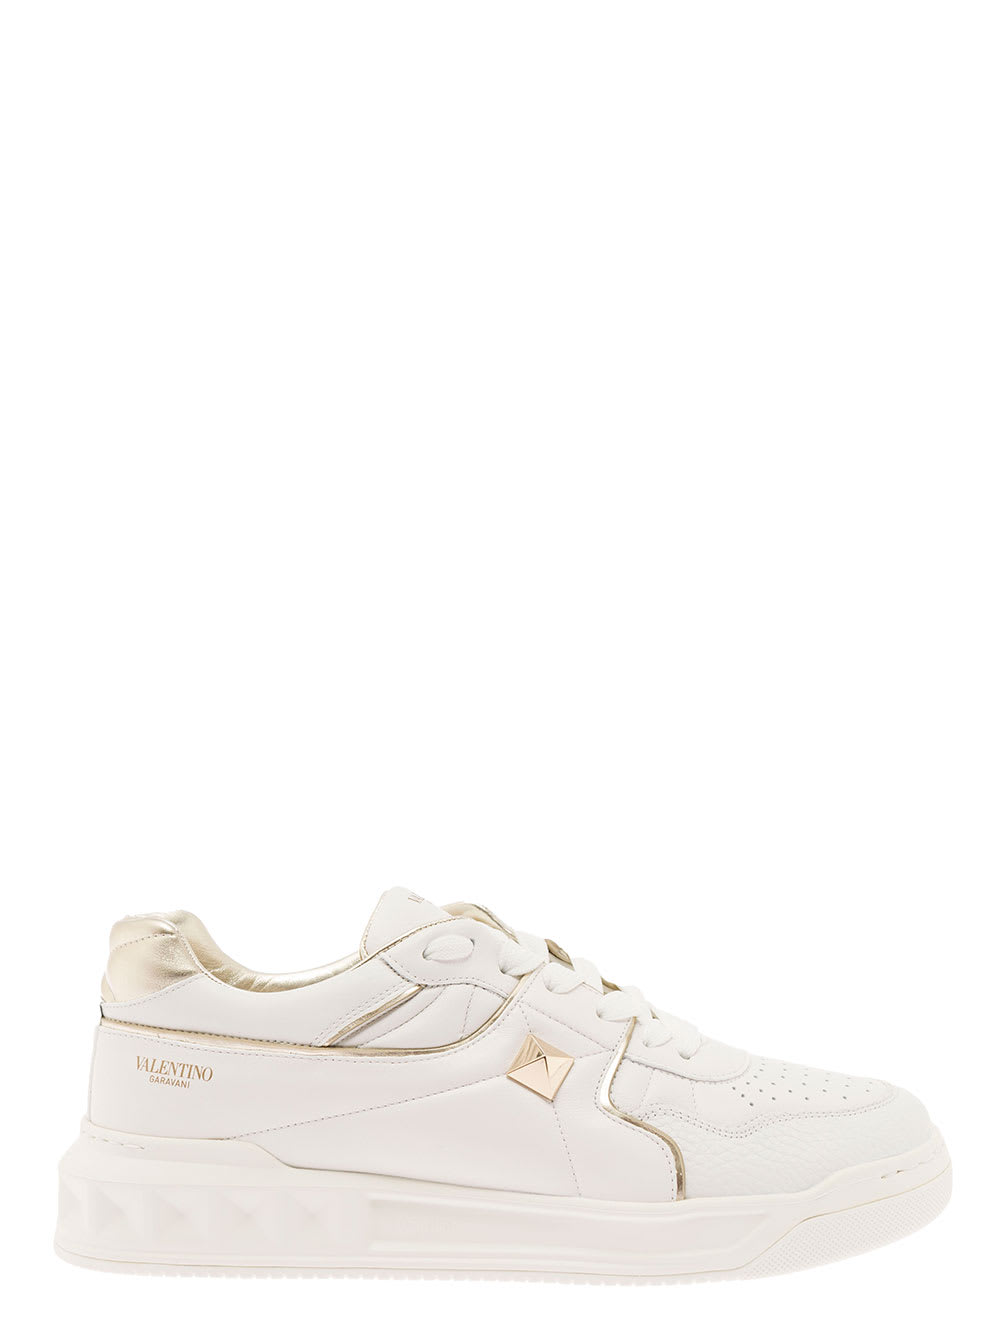 VALENTINO GARAVANI ONE STUD WHITE LOW-TOP SNEAKERS WITH MAXI STUD DETAIL AND GOLD-TONE TRIM IN LEATHER MAN